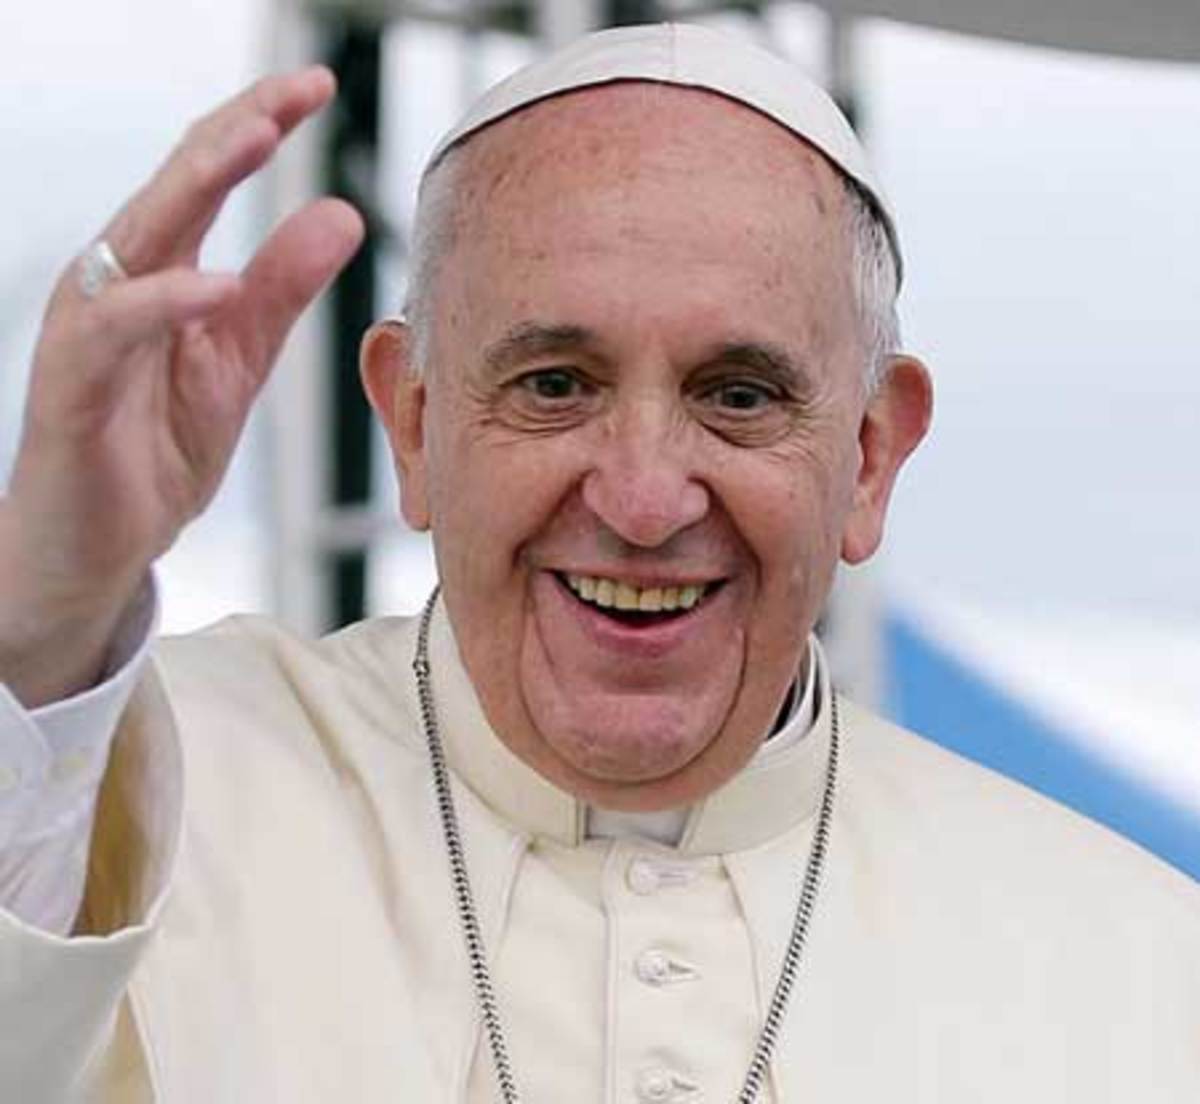 Liberal Pope Francis